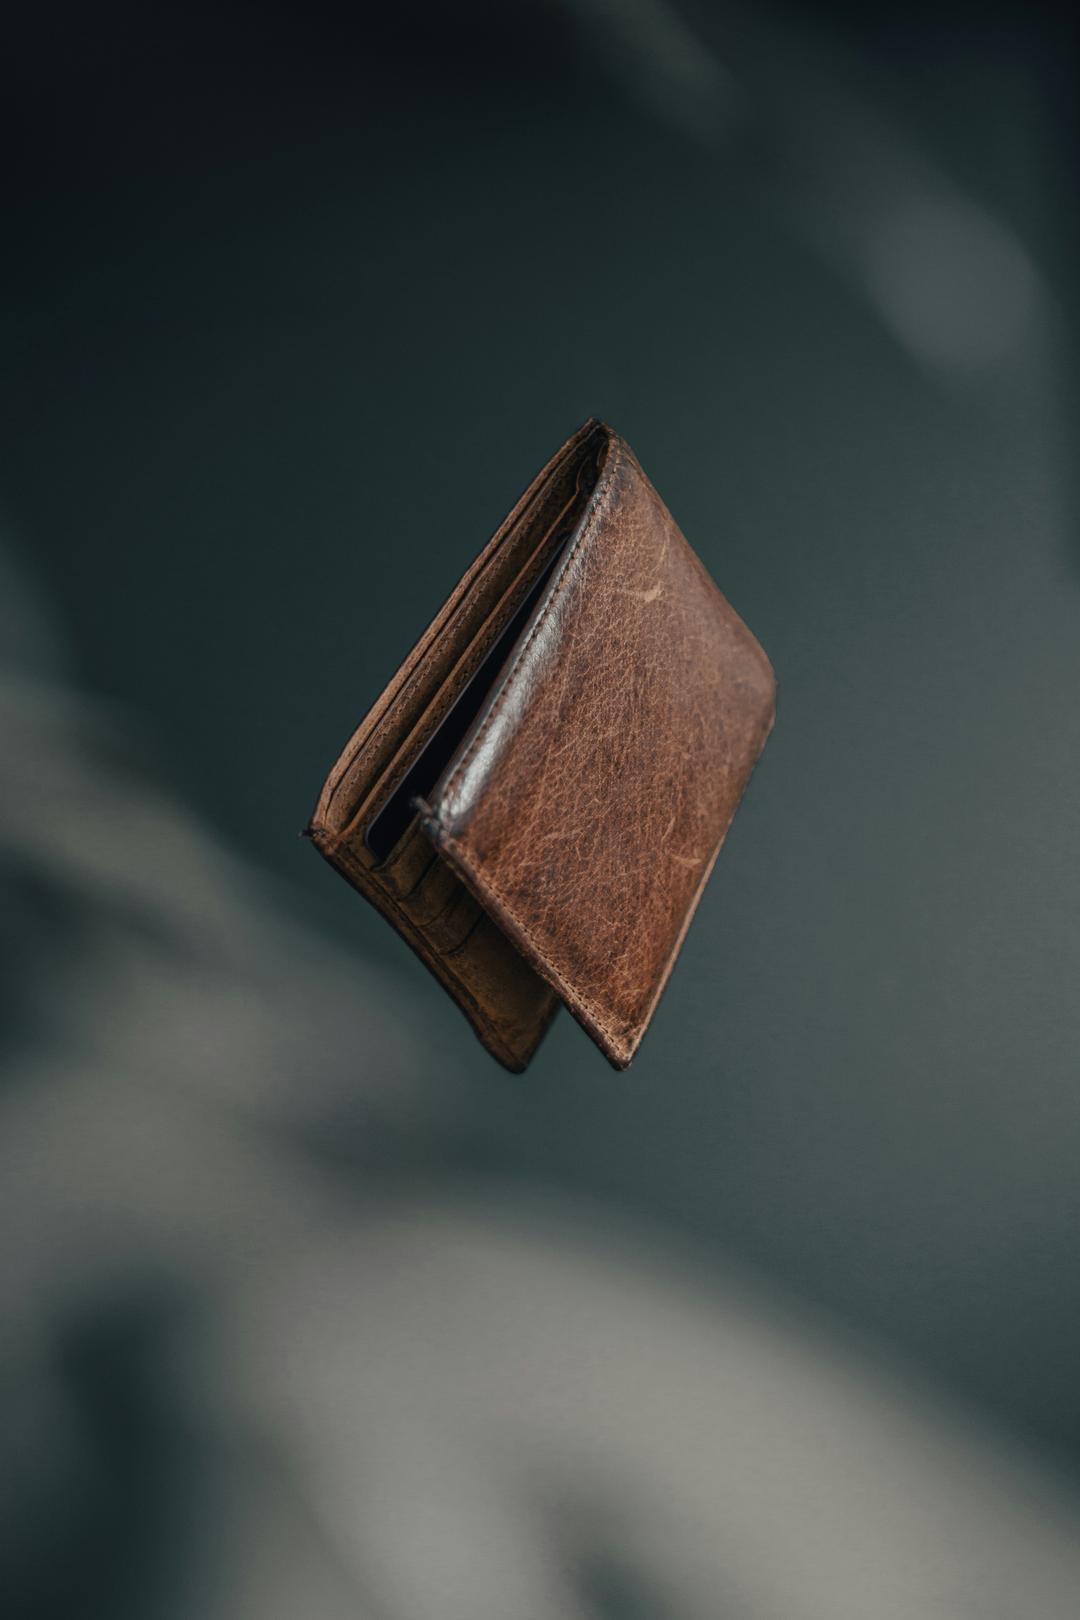 The Tommy Hilfiger Men's Leather Wallet is made from high-quality leather and features multiple card slots and a bill compartment. It has a classic design that is both stylish and functional, making it the perfect accessory for any occasion.